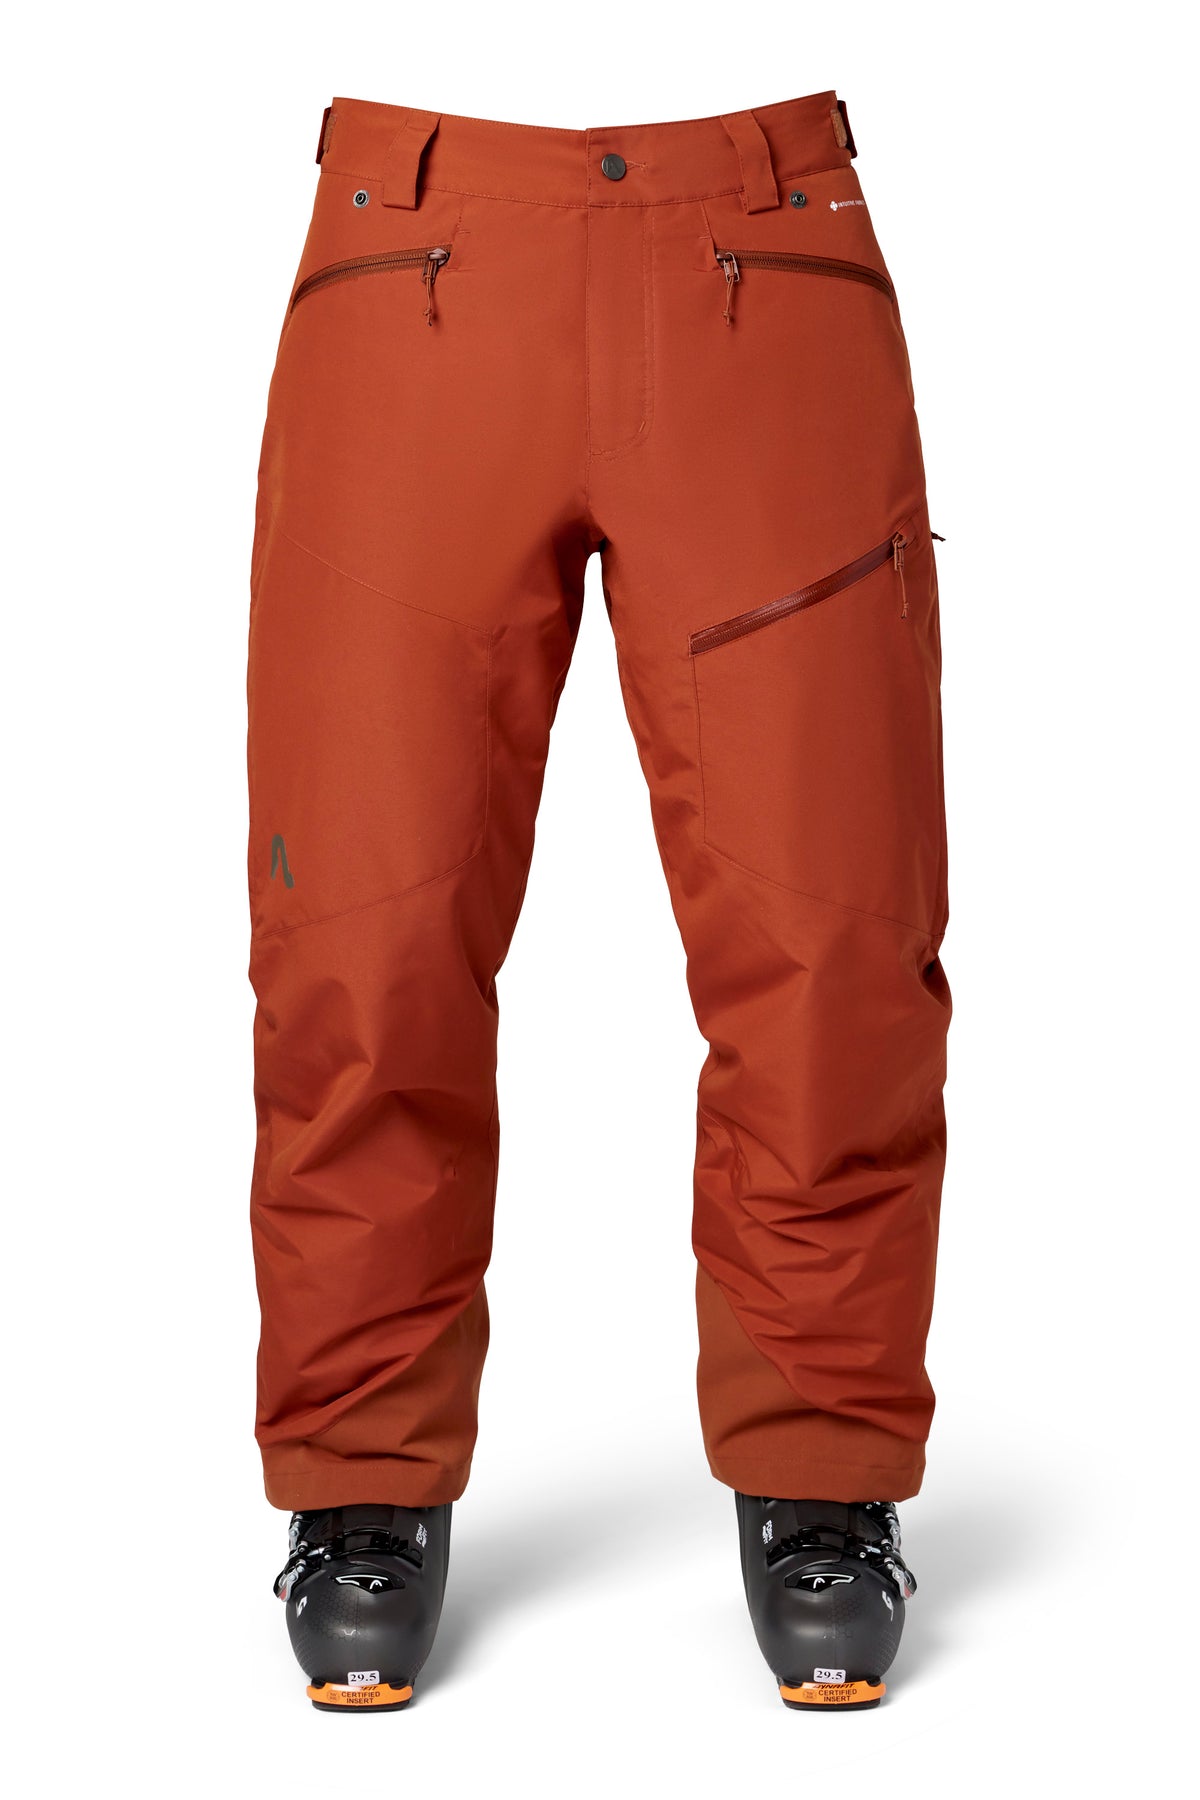 11 of the Best Men's Winter Pants to Stay Warm & Dry 2022